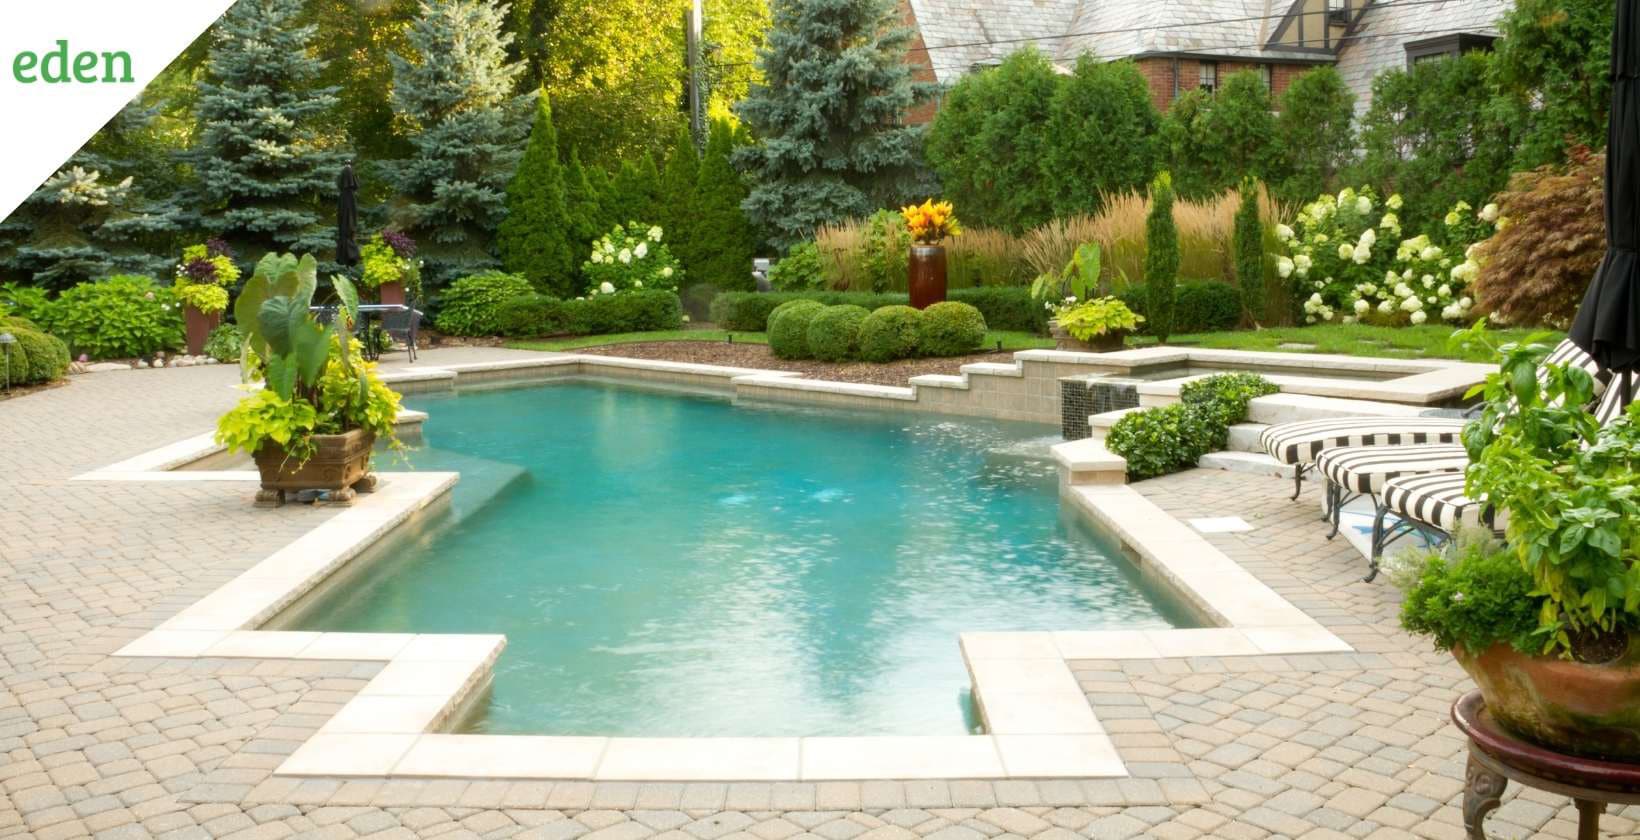 How to Landscape around an In-Ground Pool